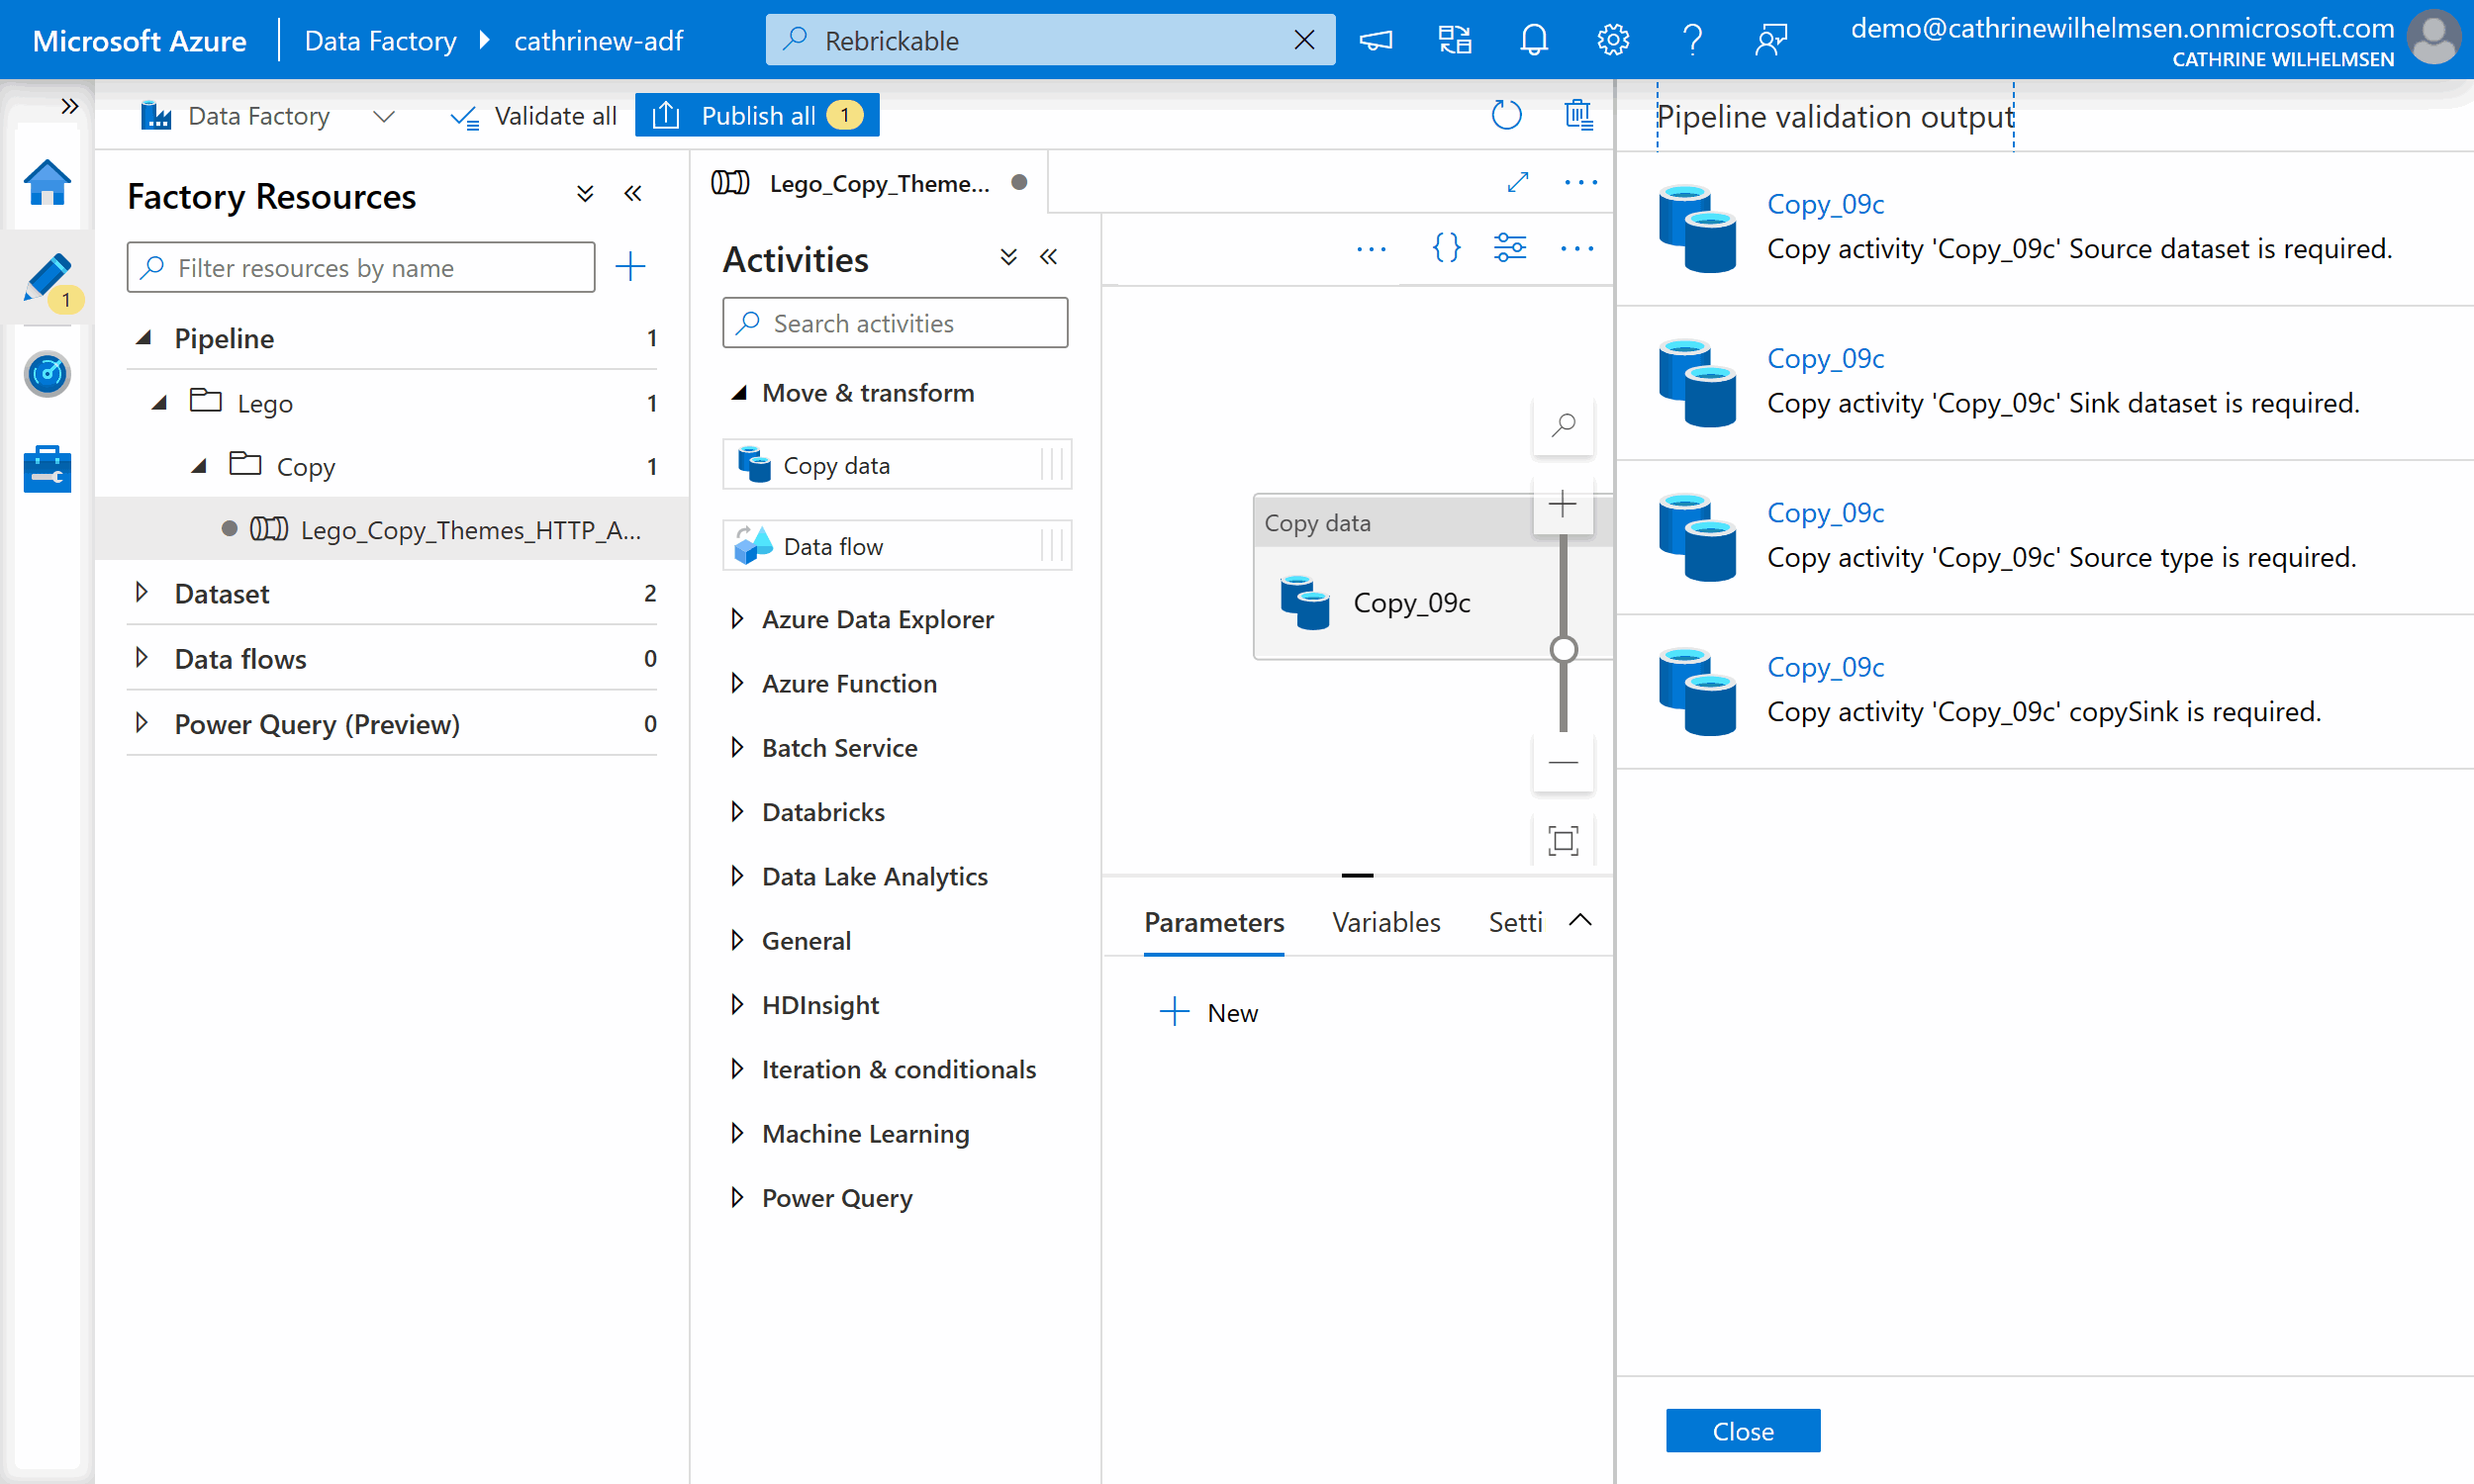 Screenshot of the Azure Data Factory user interface showing pipeline validation output.